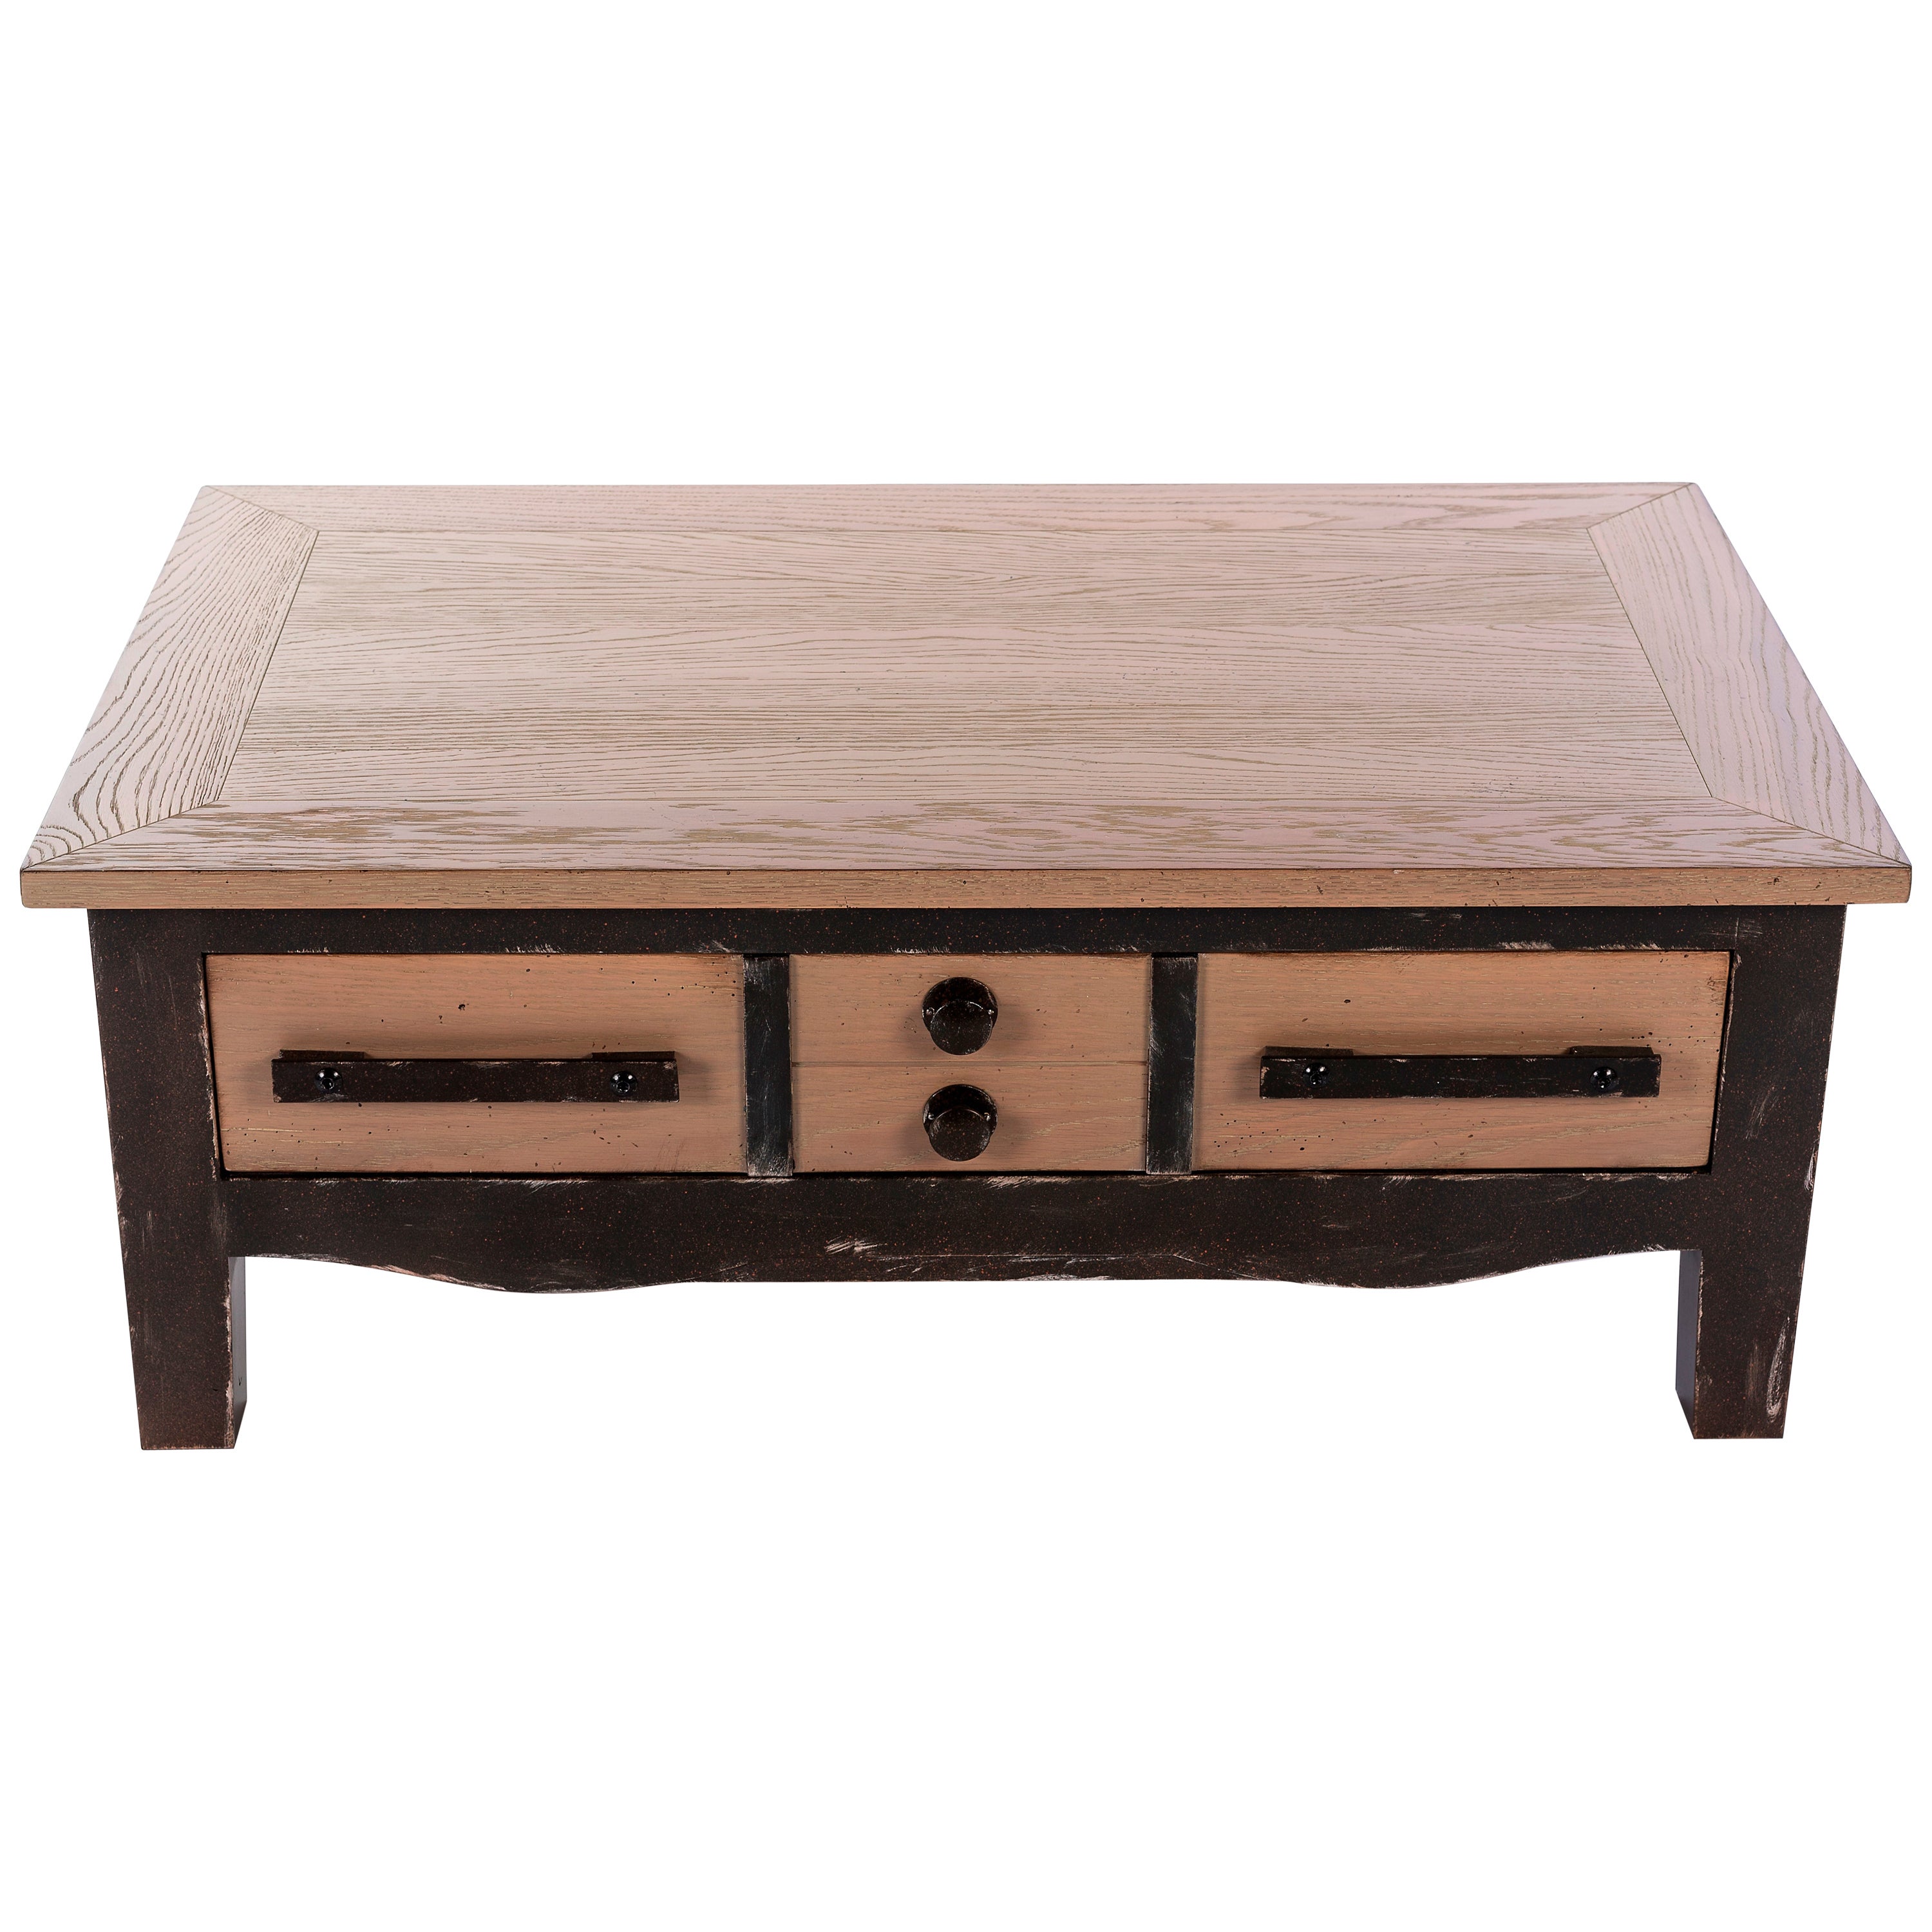 French Vintage Coffee Table, Indus Style, Solid Oak, Black Lacquered Oak Stained For Sale